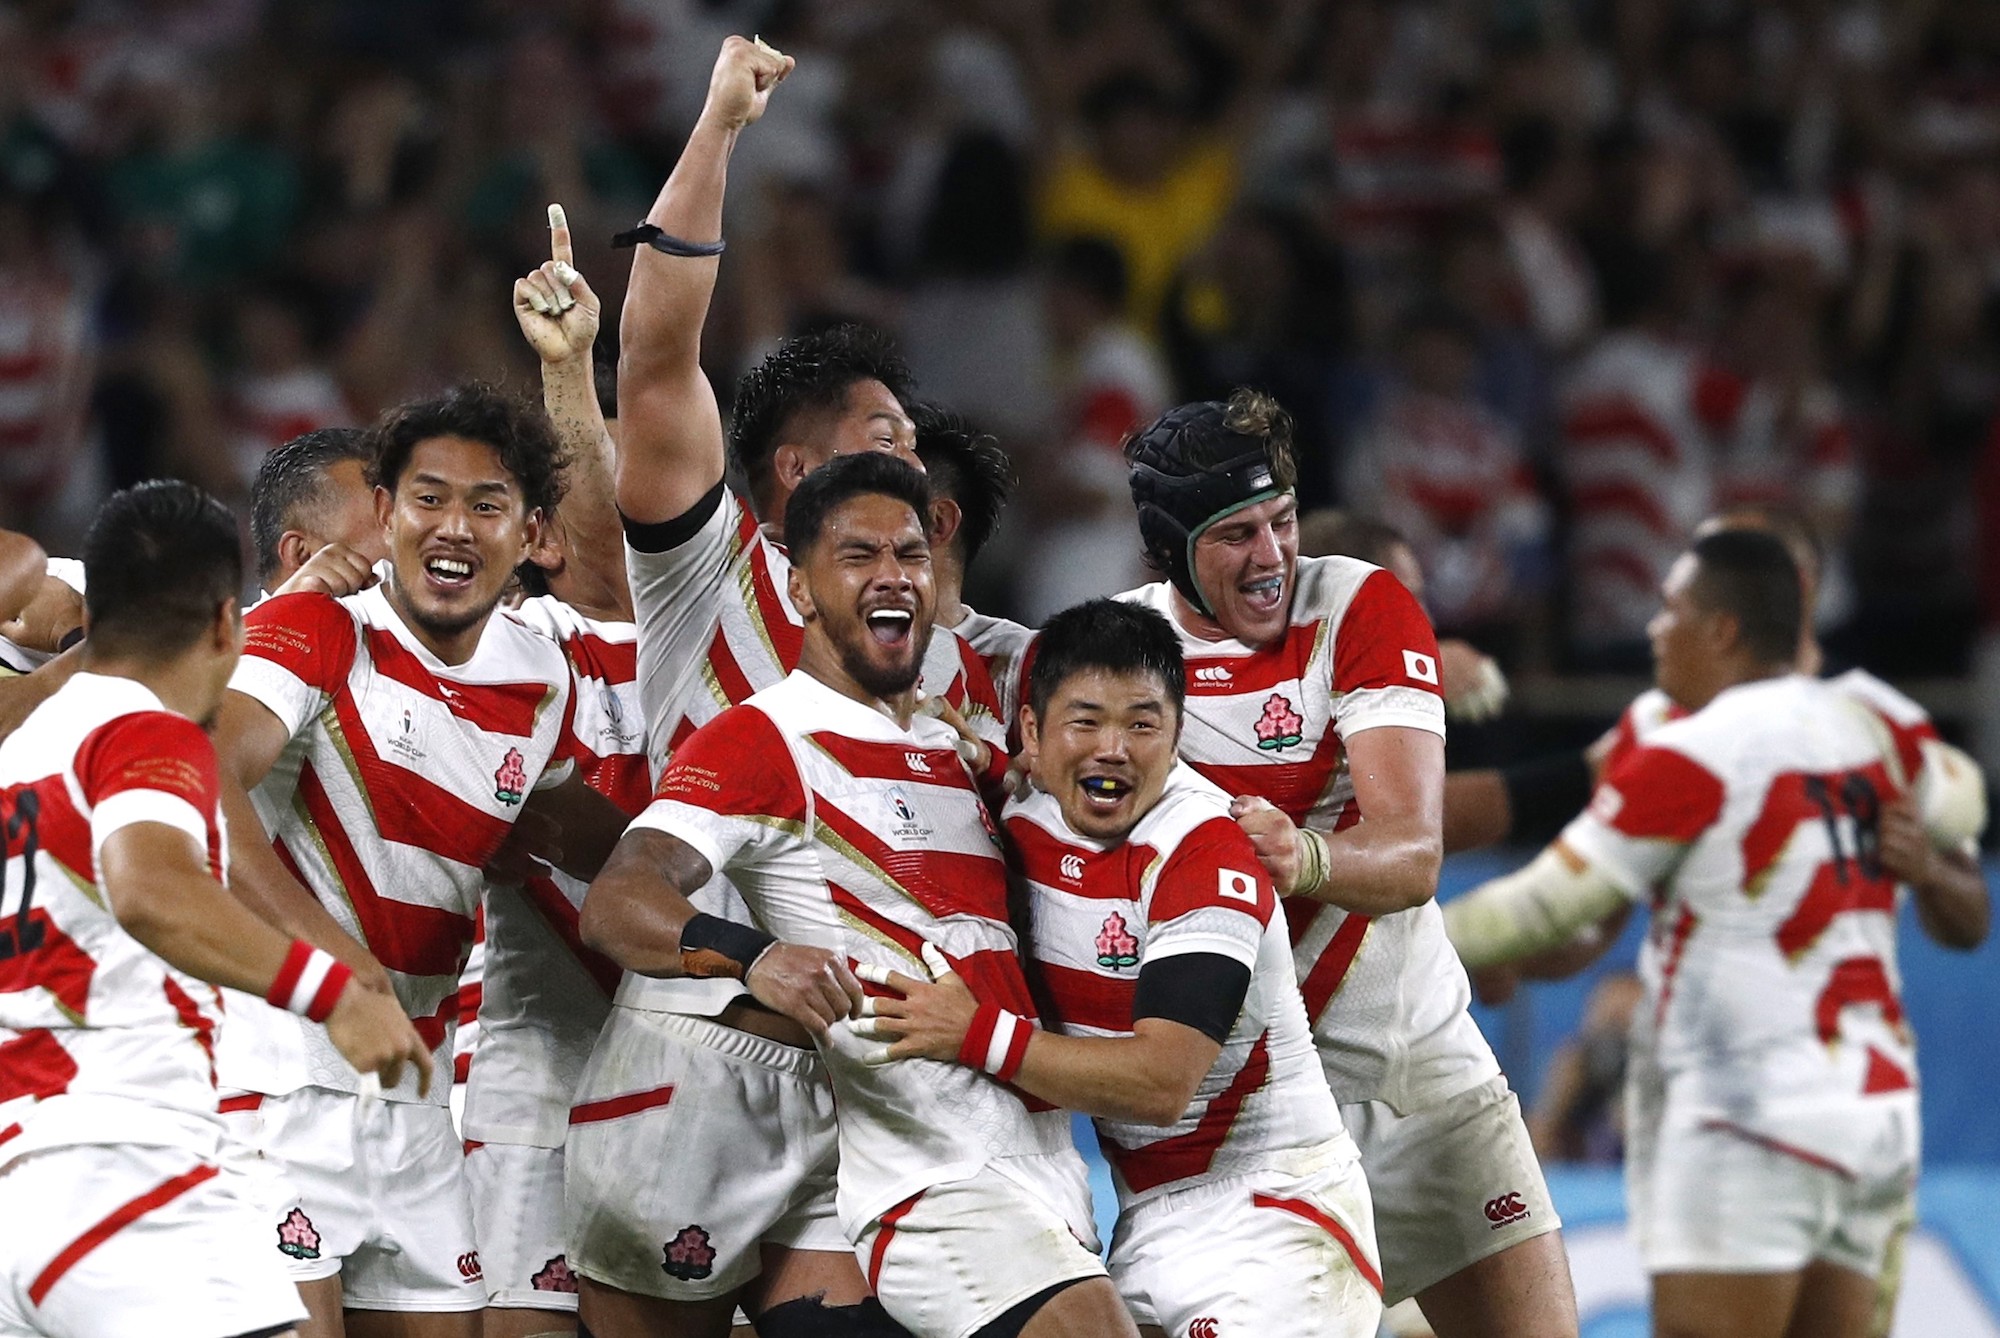 Japan's Brave Blossoms celebrate Saturday after beating Ireland in the second Pool A game of the 2019 Rugby World Cup. | REUTERS